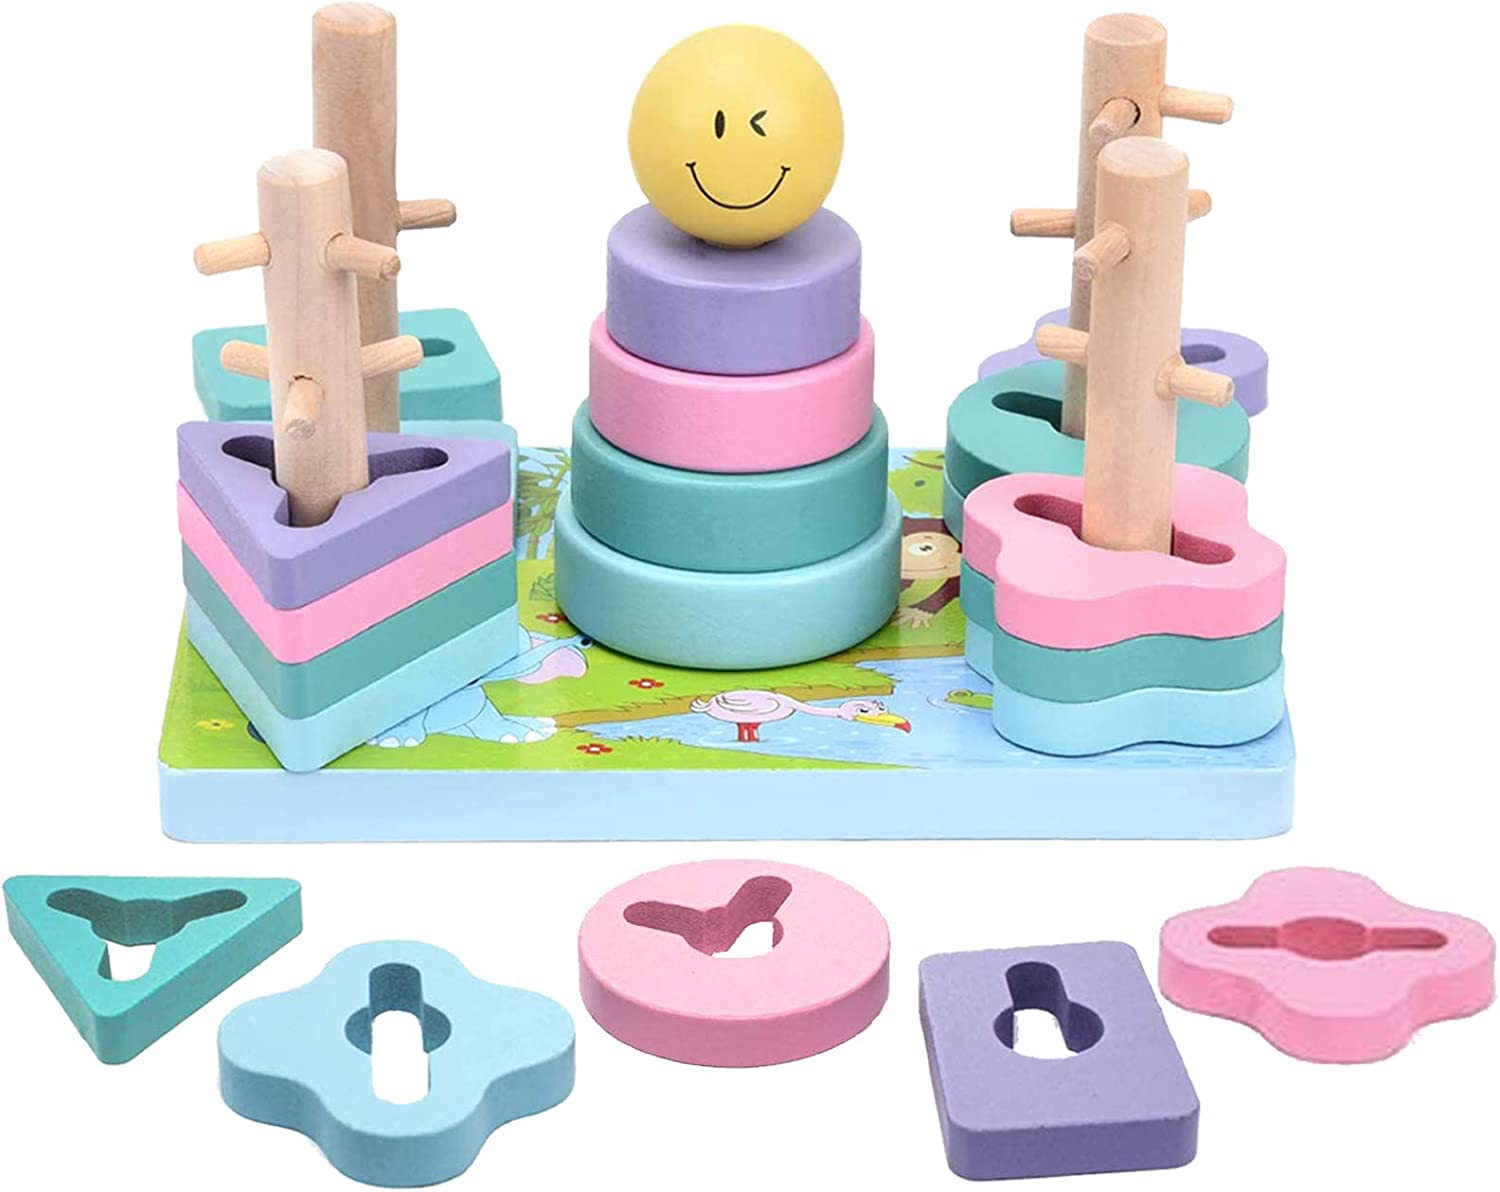 Multifunction Stacking Wooden Game For Early Education Of Kids And Toddlers